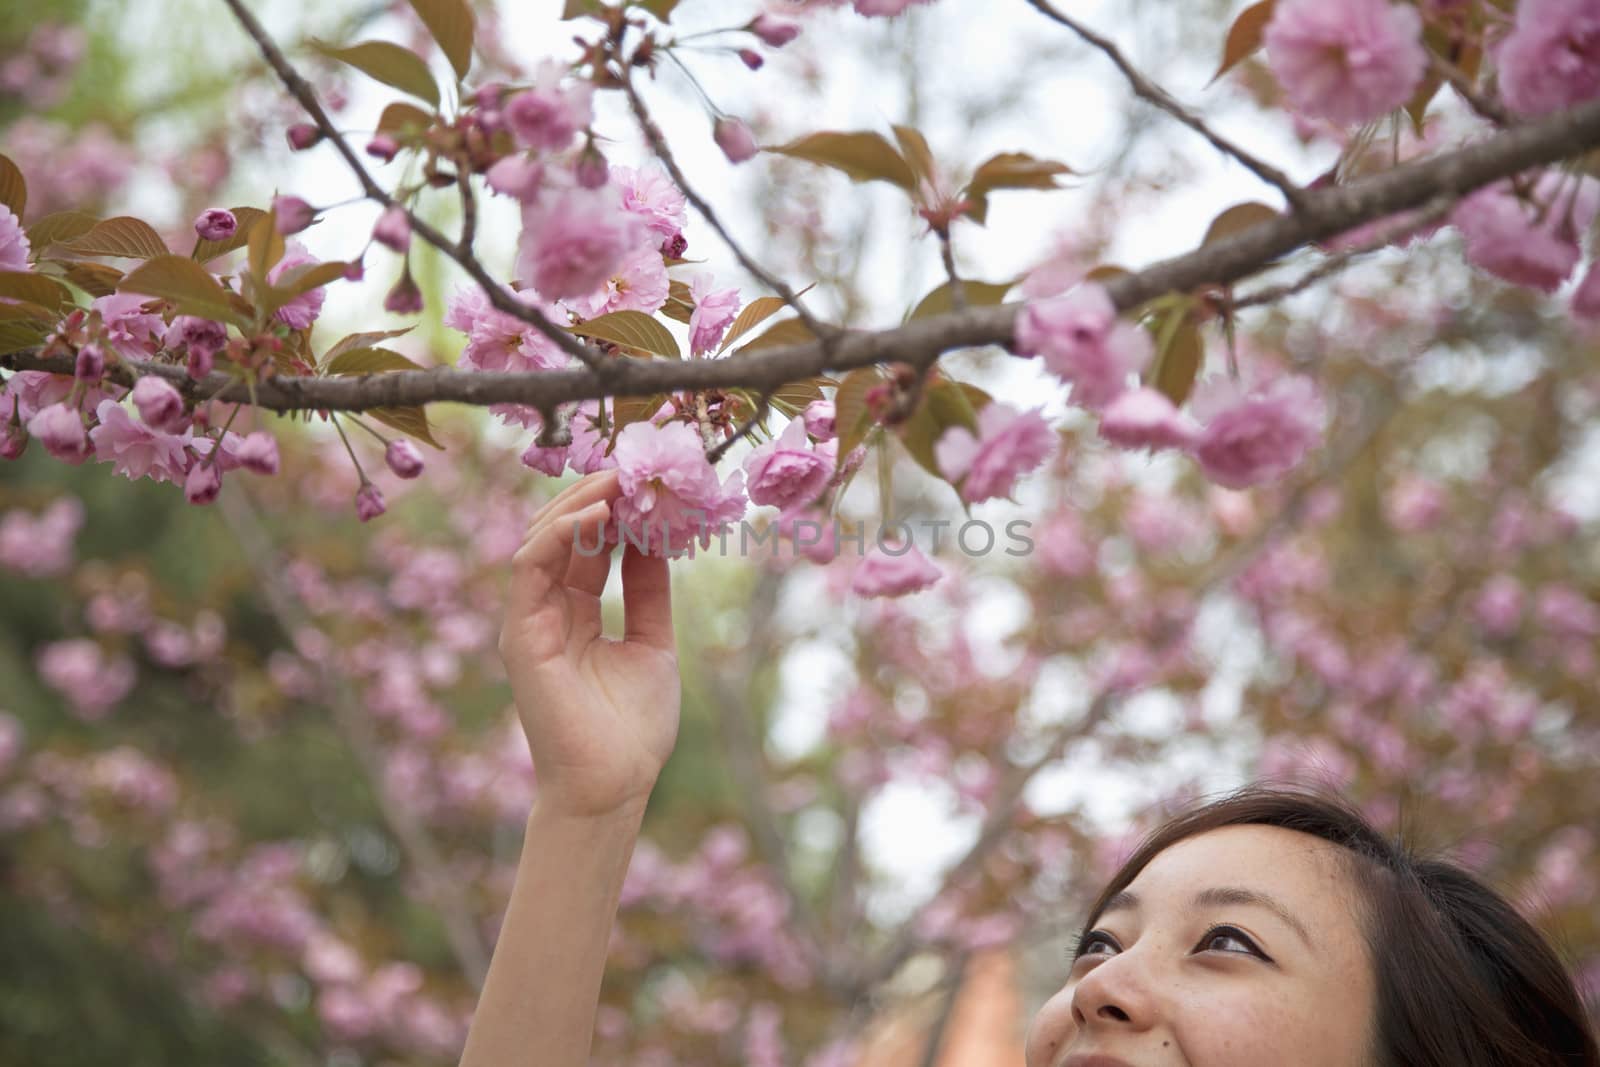 Close-Up of young woman reaching for a pink blossom on a tree branch, outdoors in the park in springtime by XiXinXing